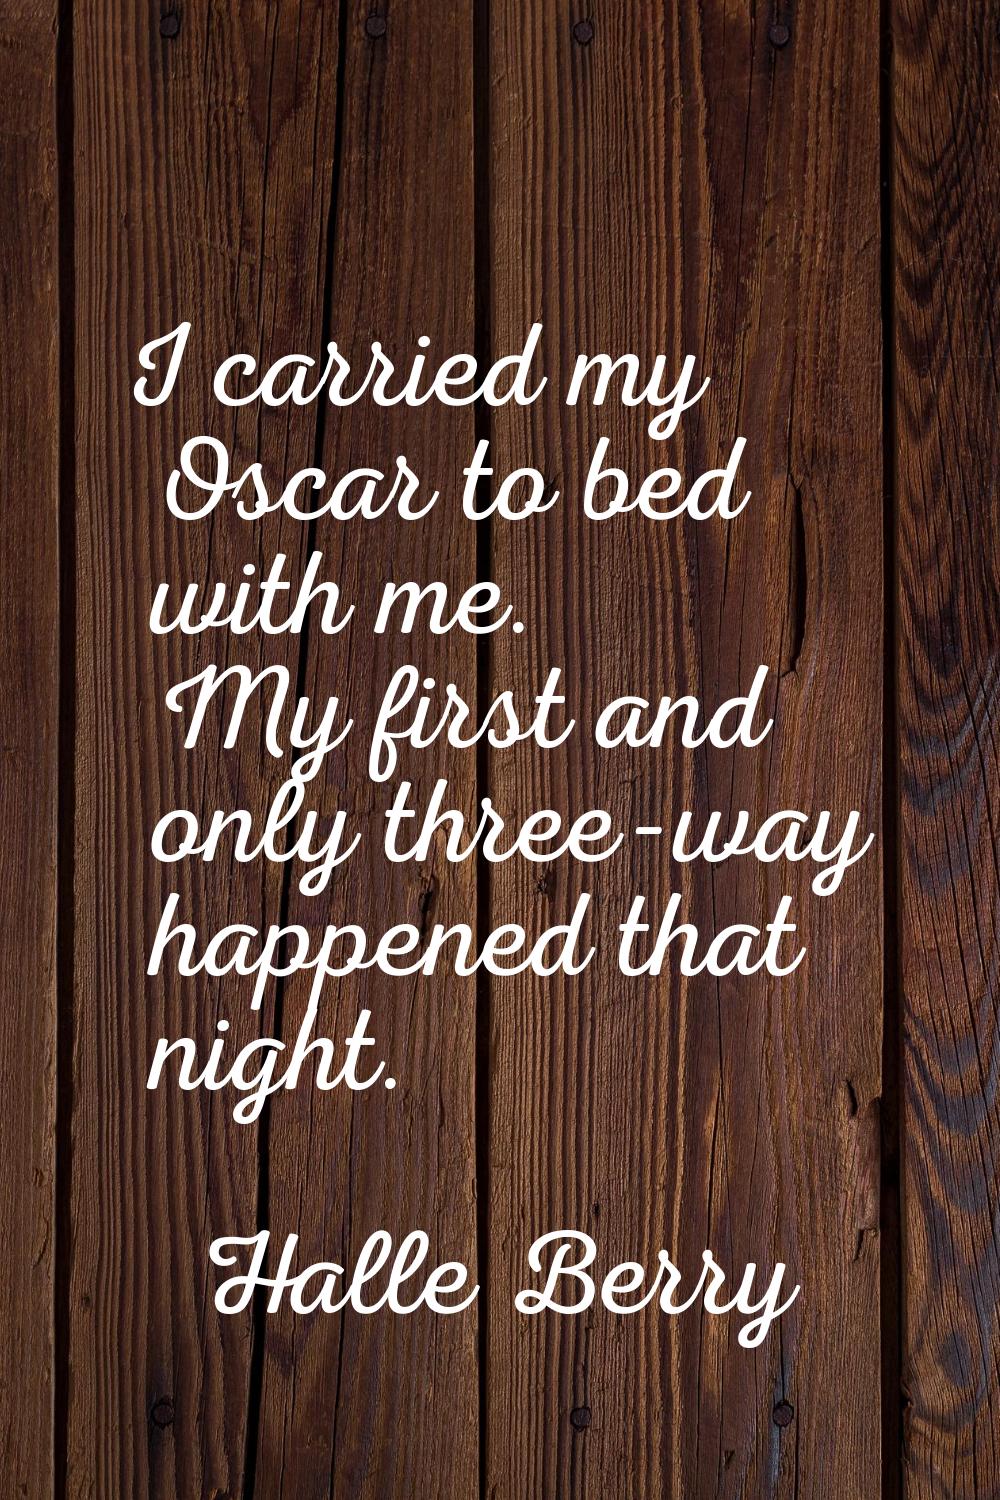 I carried my Oscar to bed with me. My first and only three-way happened that night.